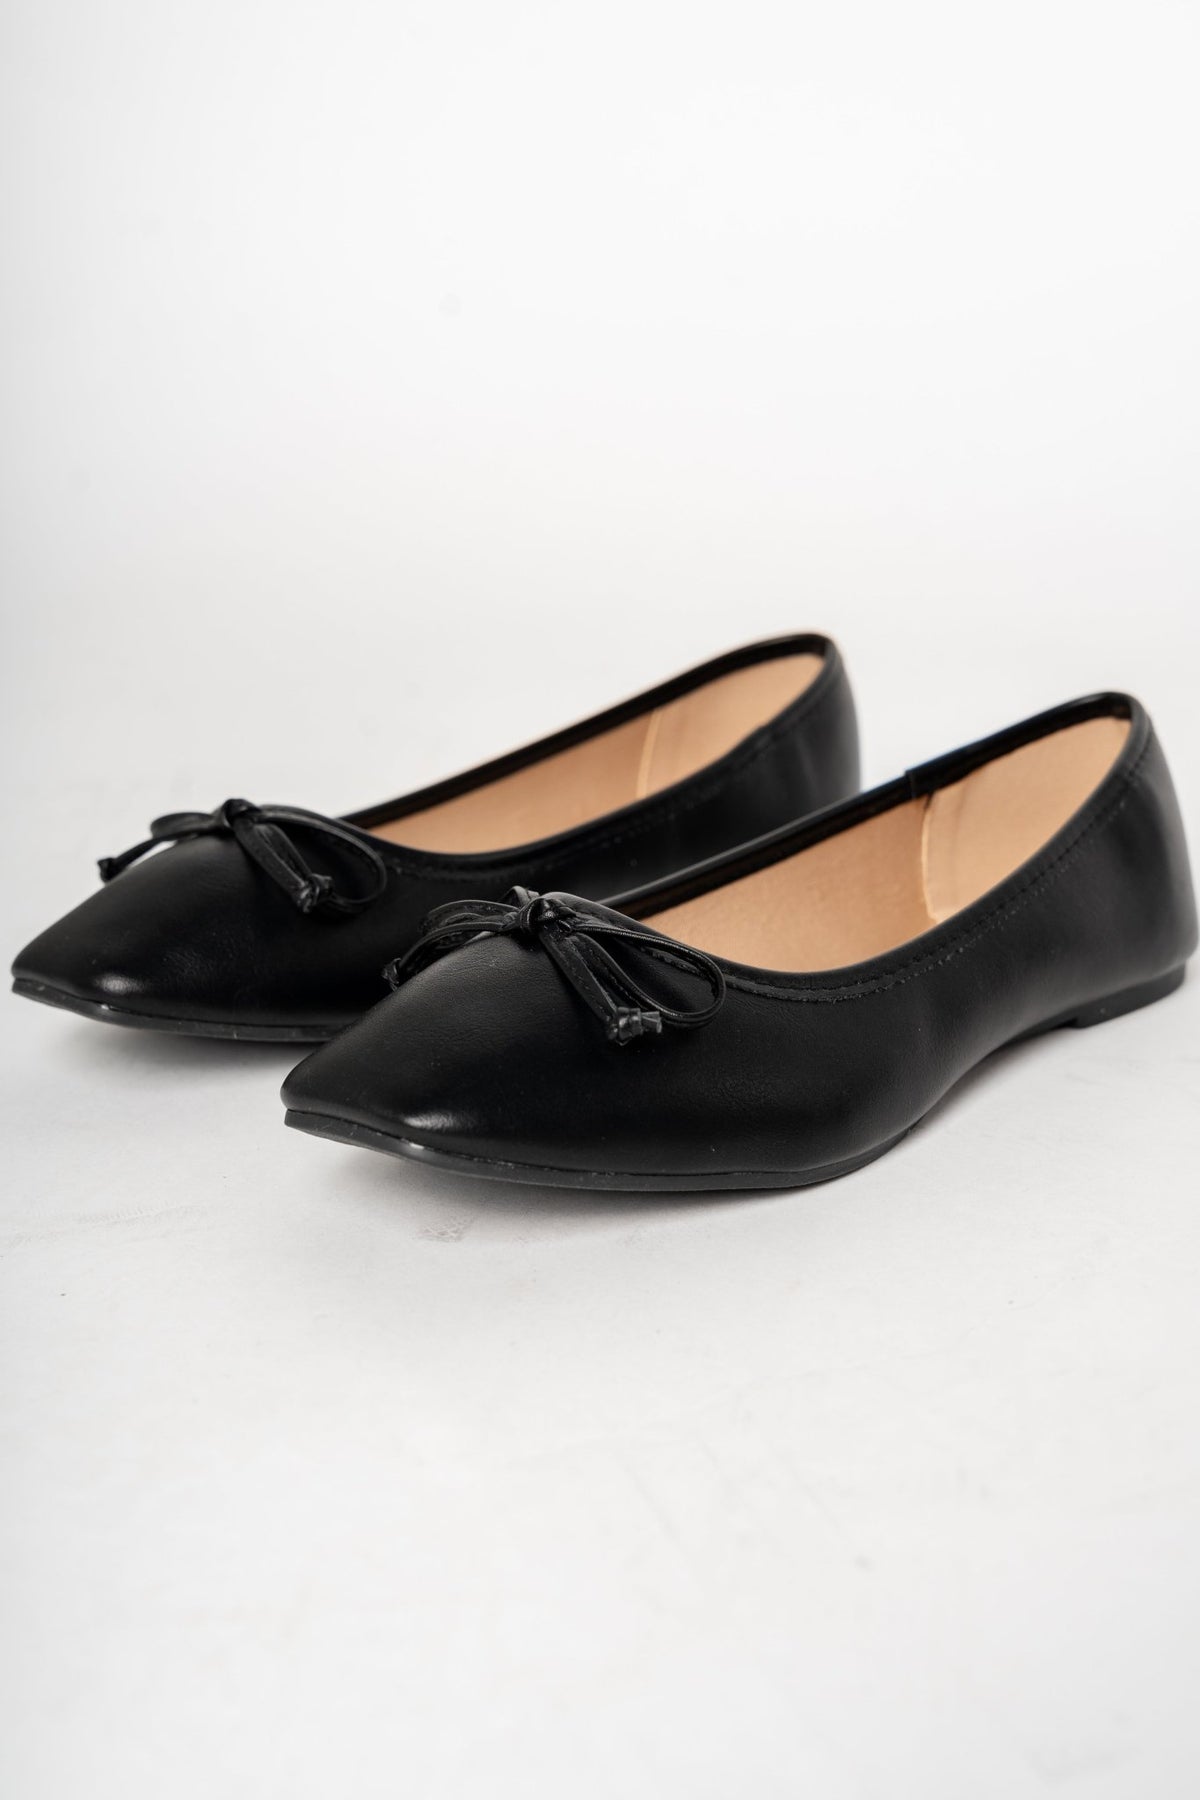 Tulin bow ballerina flats black - Cute shoes - Trendy Shoes at Lush Fashion Lounge Boutique in Oklahoma City